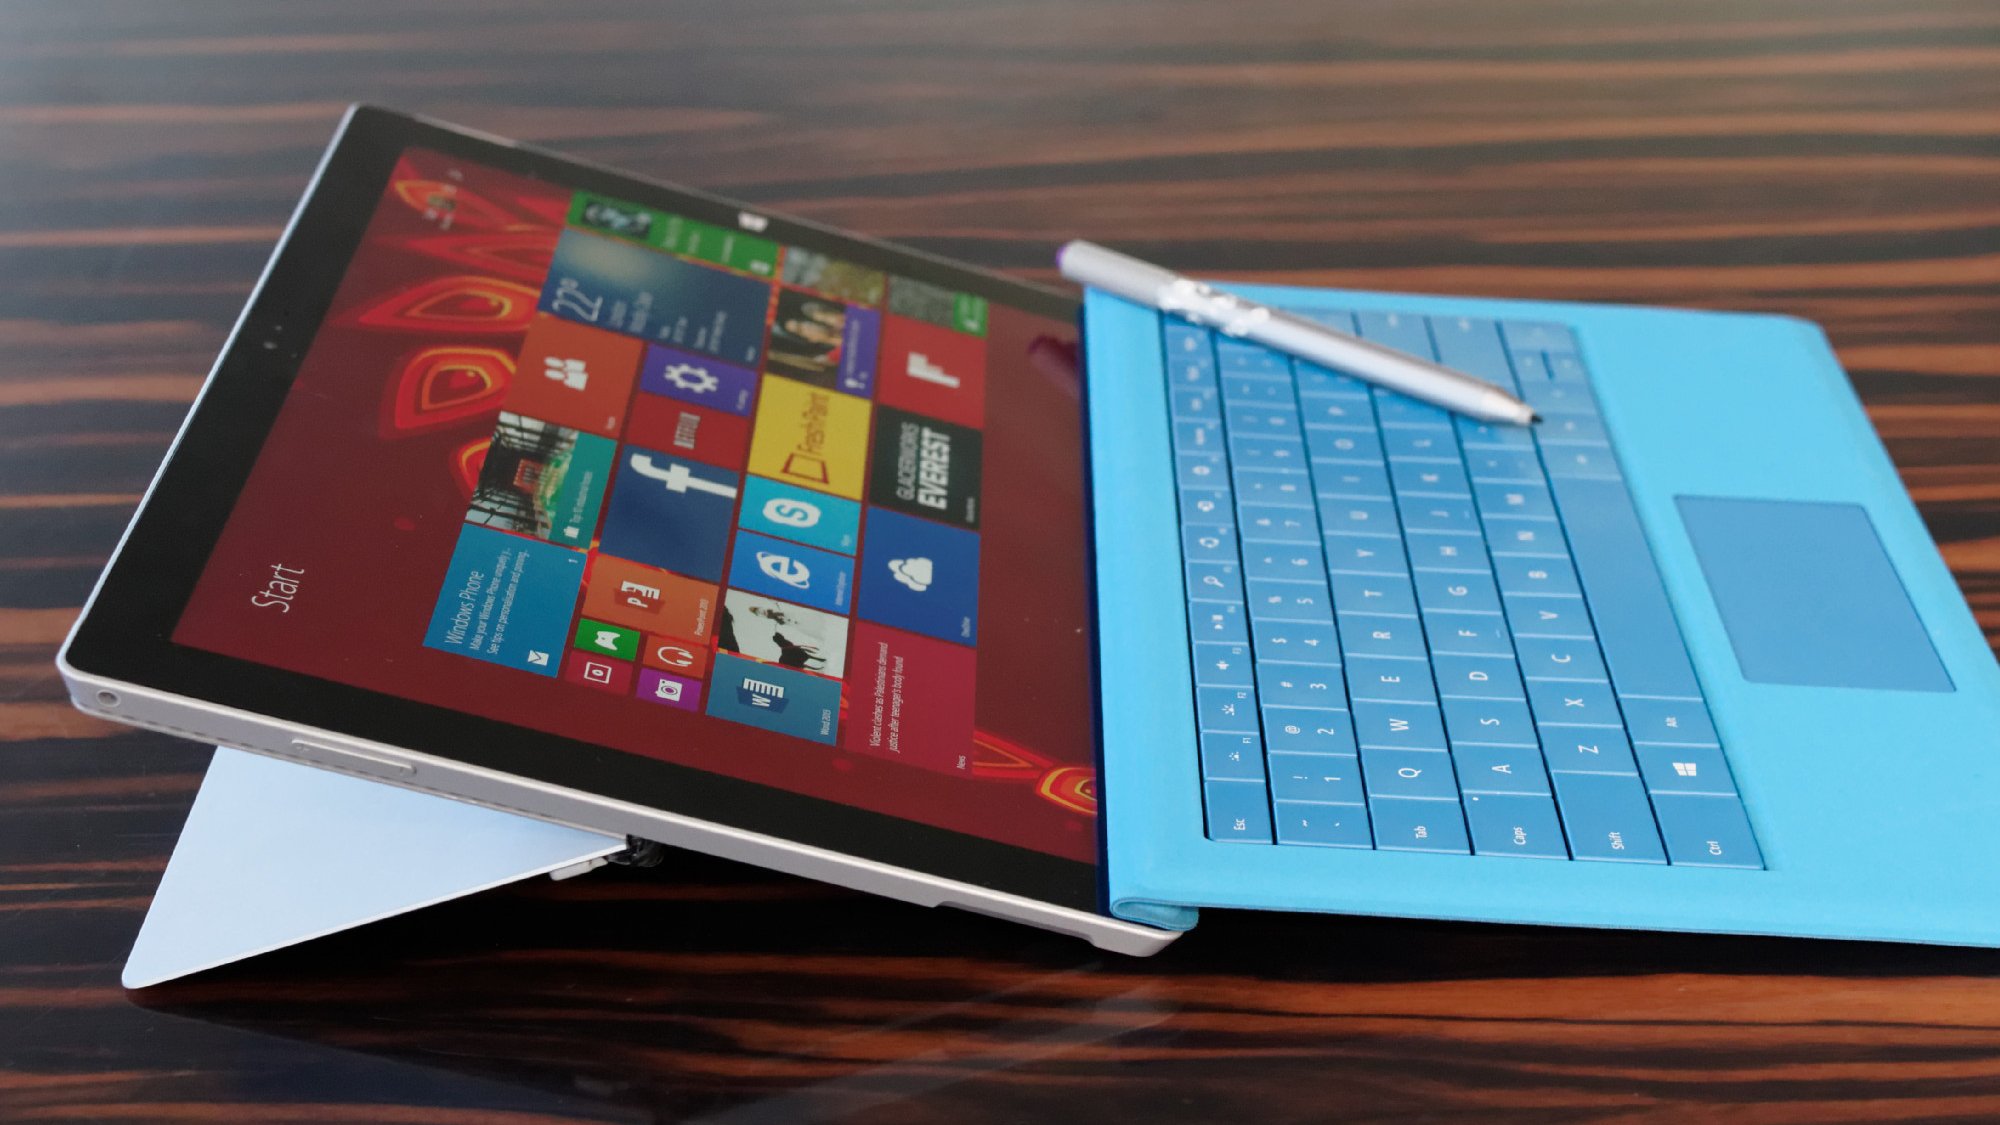 Microsoft Surface Pro 3 Review The Surface That Got It Right